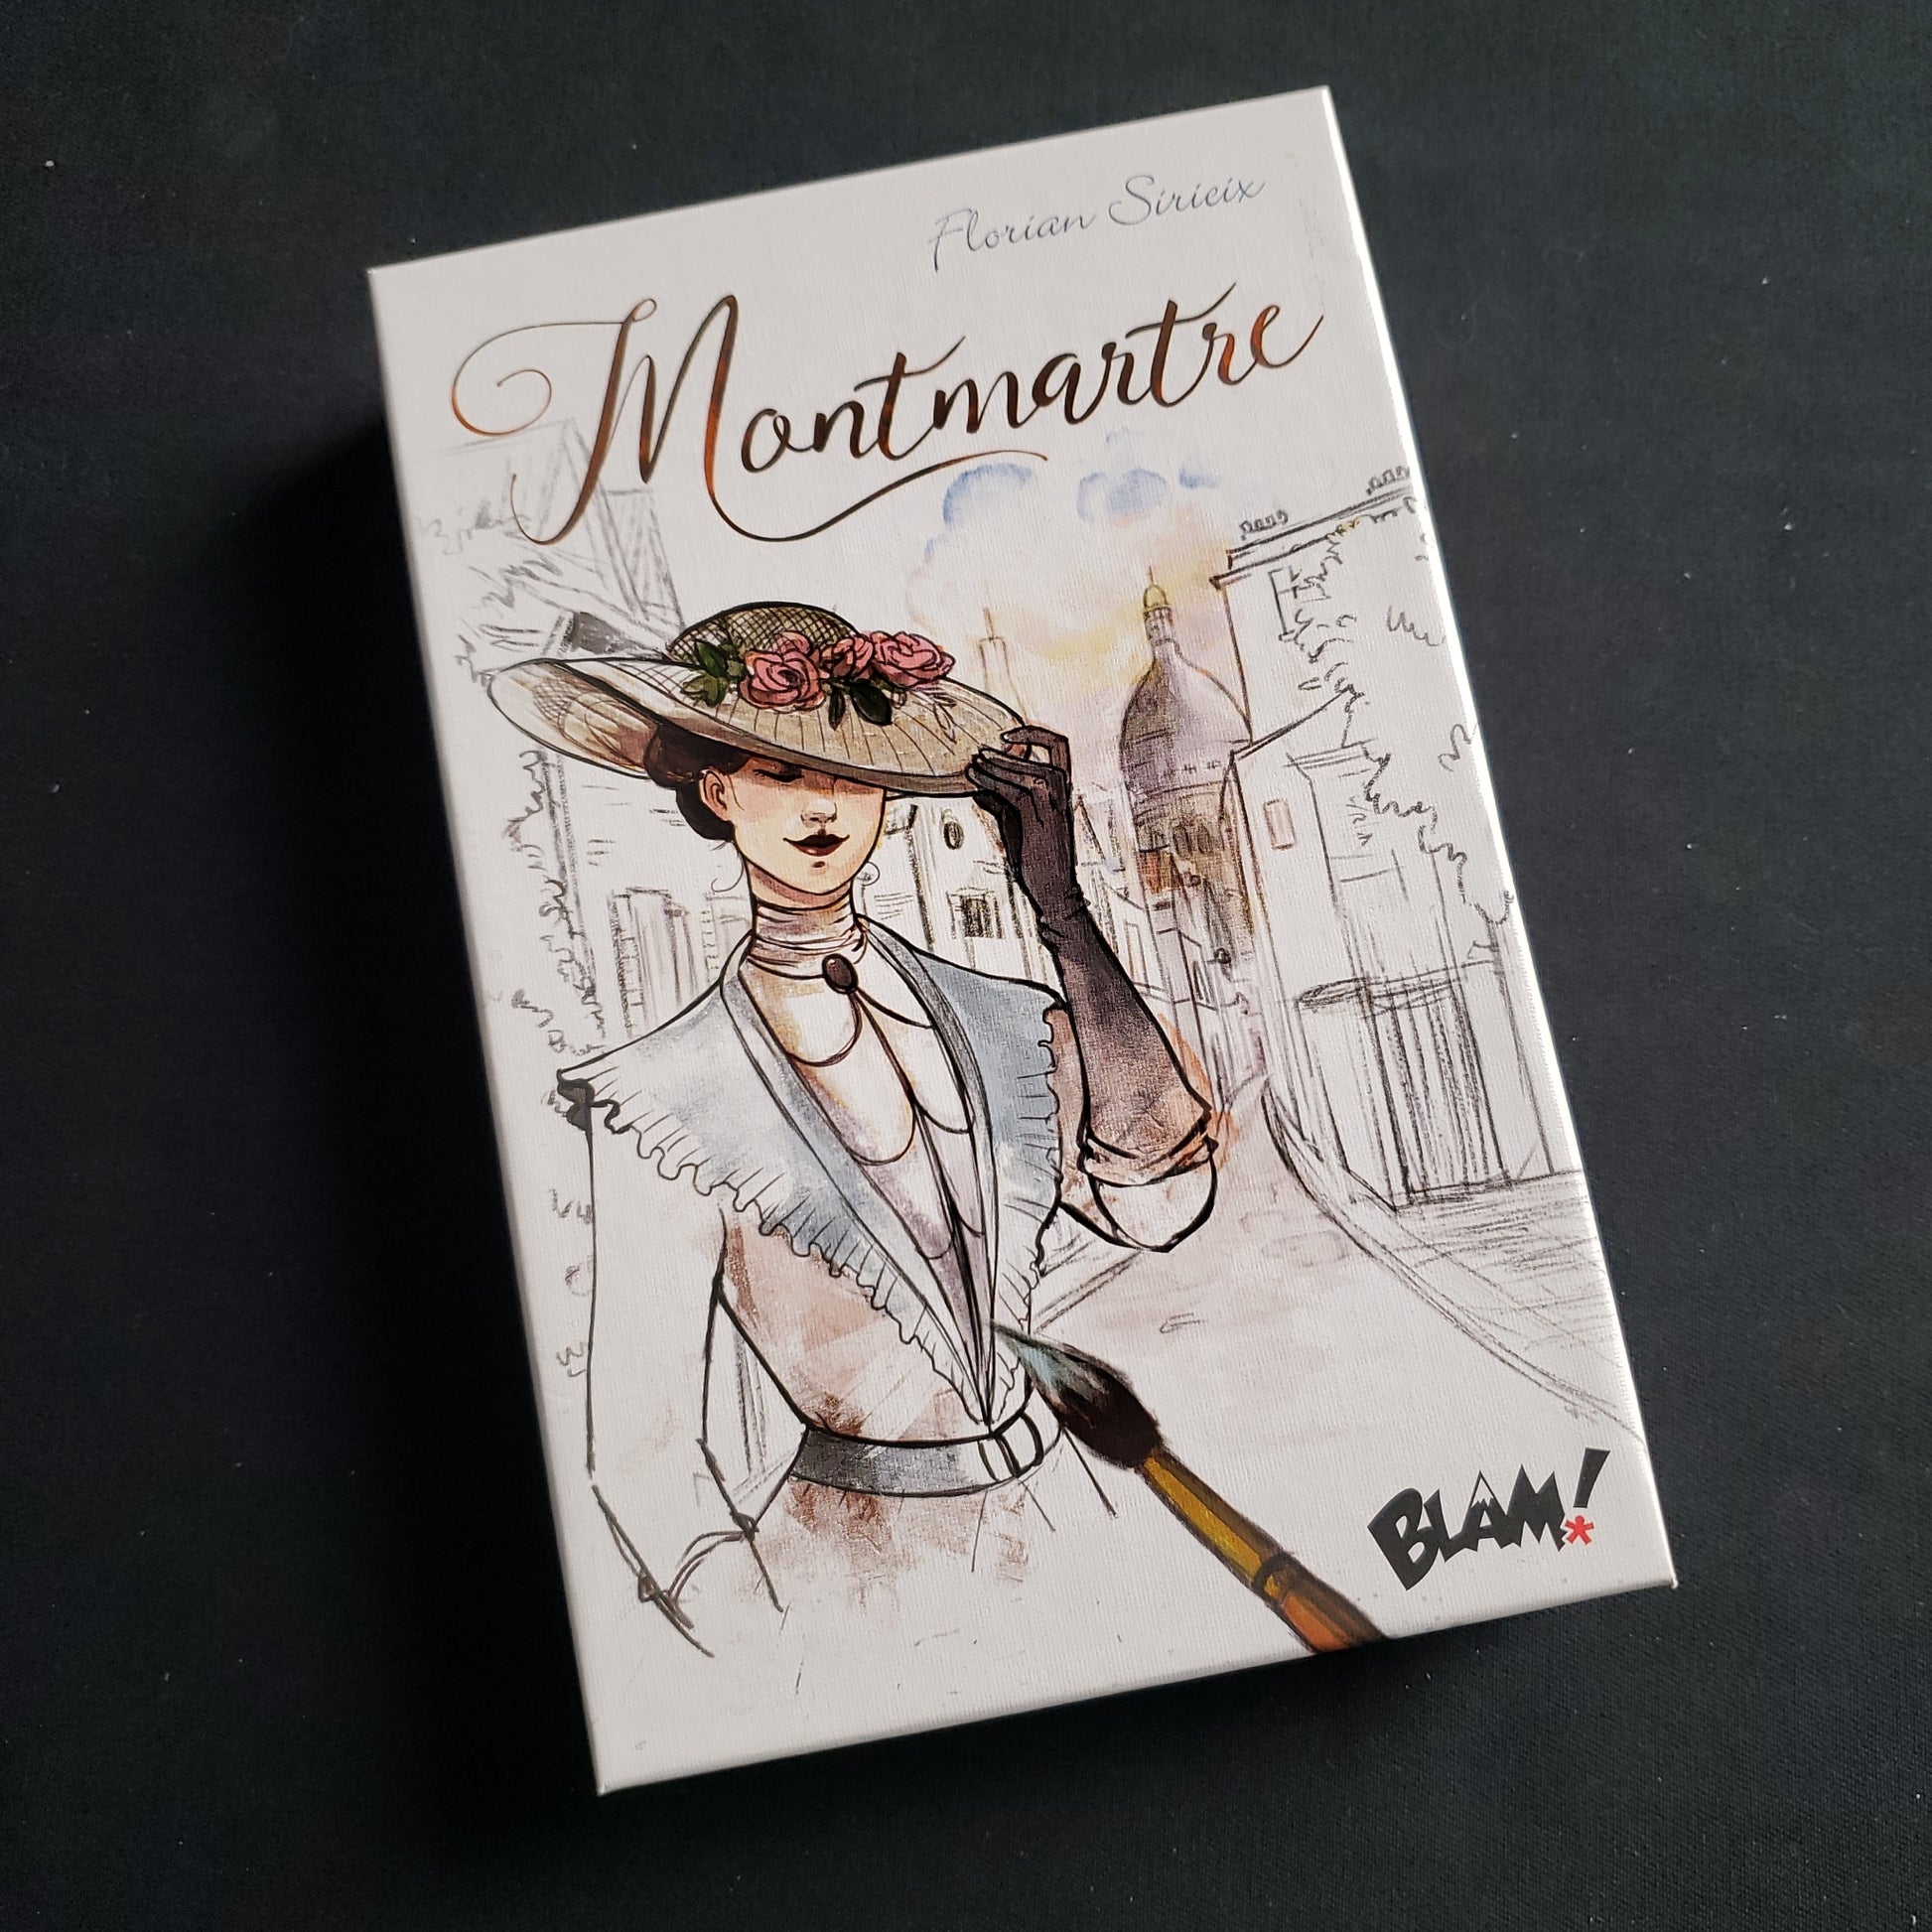 Image shows the front cover of the box of the Montmartre card game